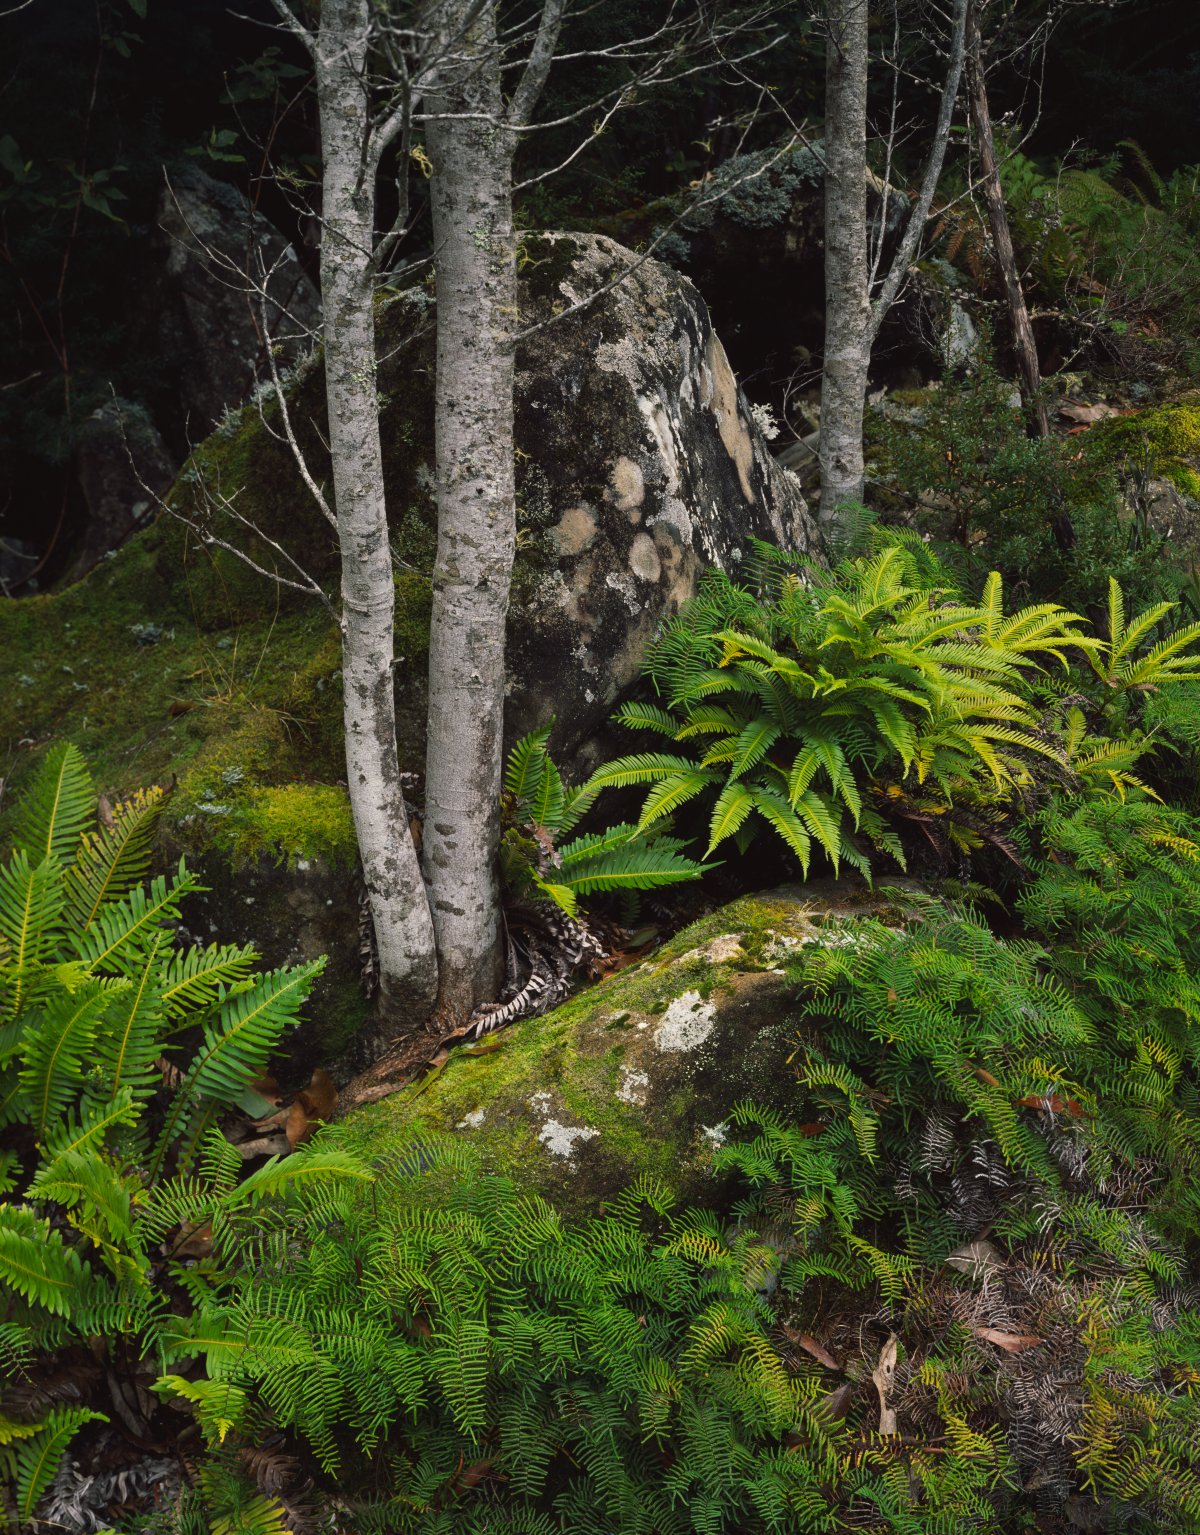 A forest scene with ferns and mossy boulders and trees.